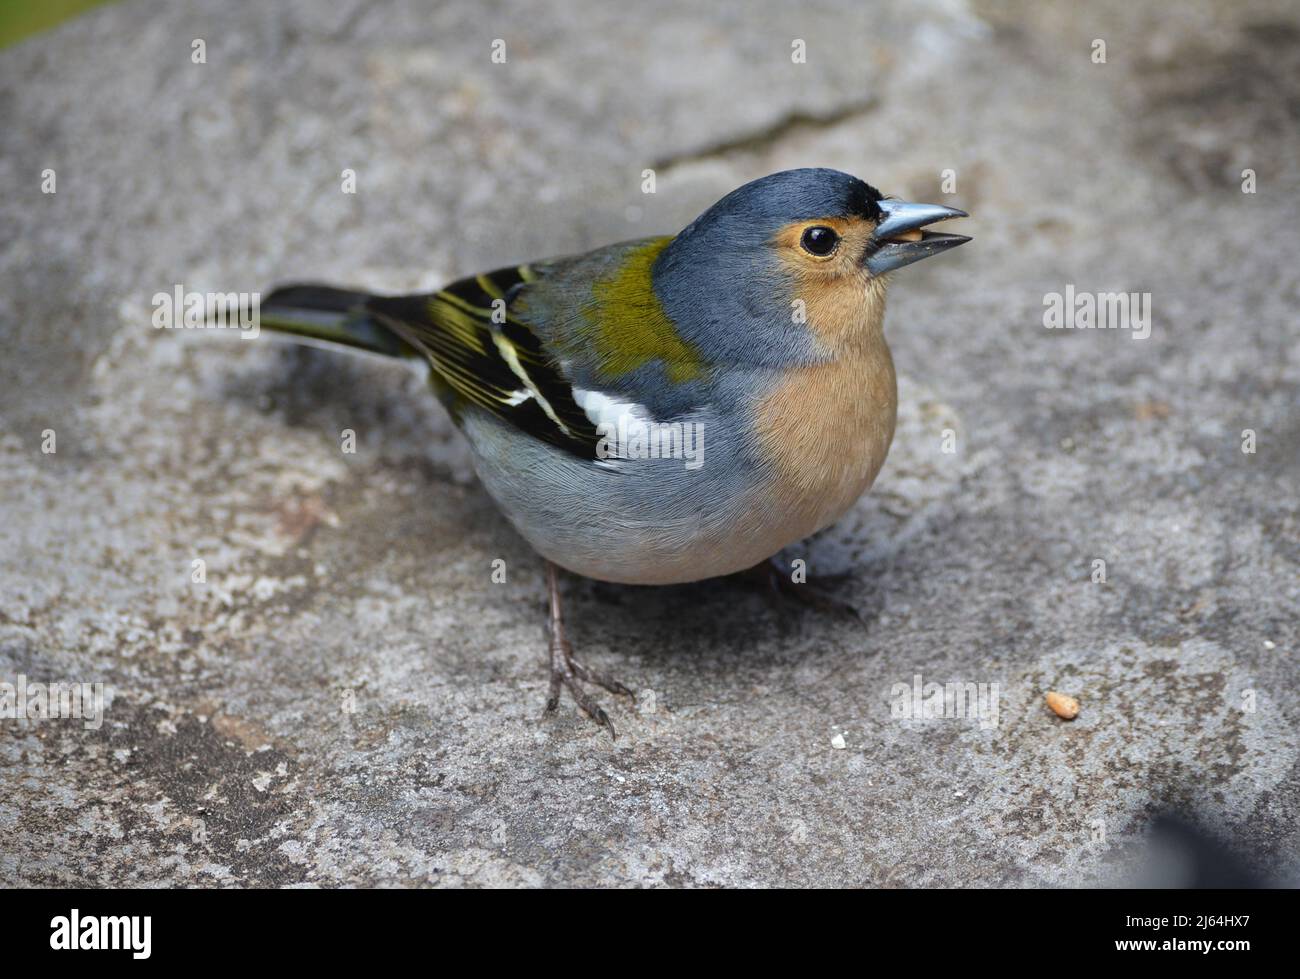 Madeiran chaffinch (Fringilla coelebs madeirensis), a species commonly observed in the laurisilva forest habitat Stock Photo